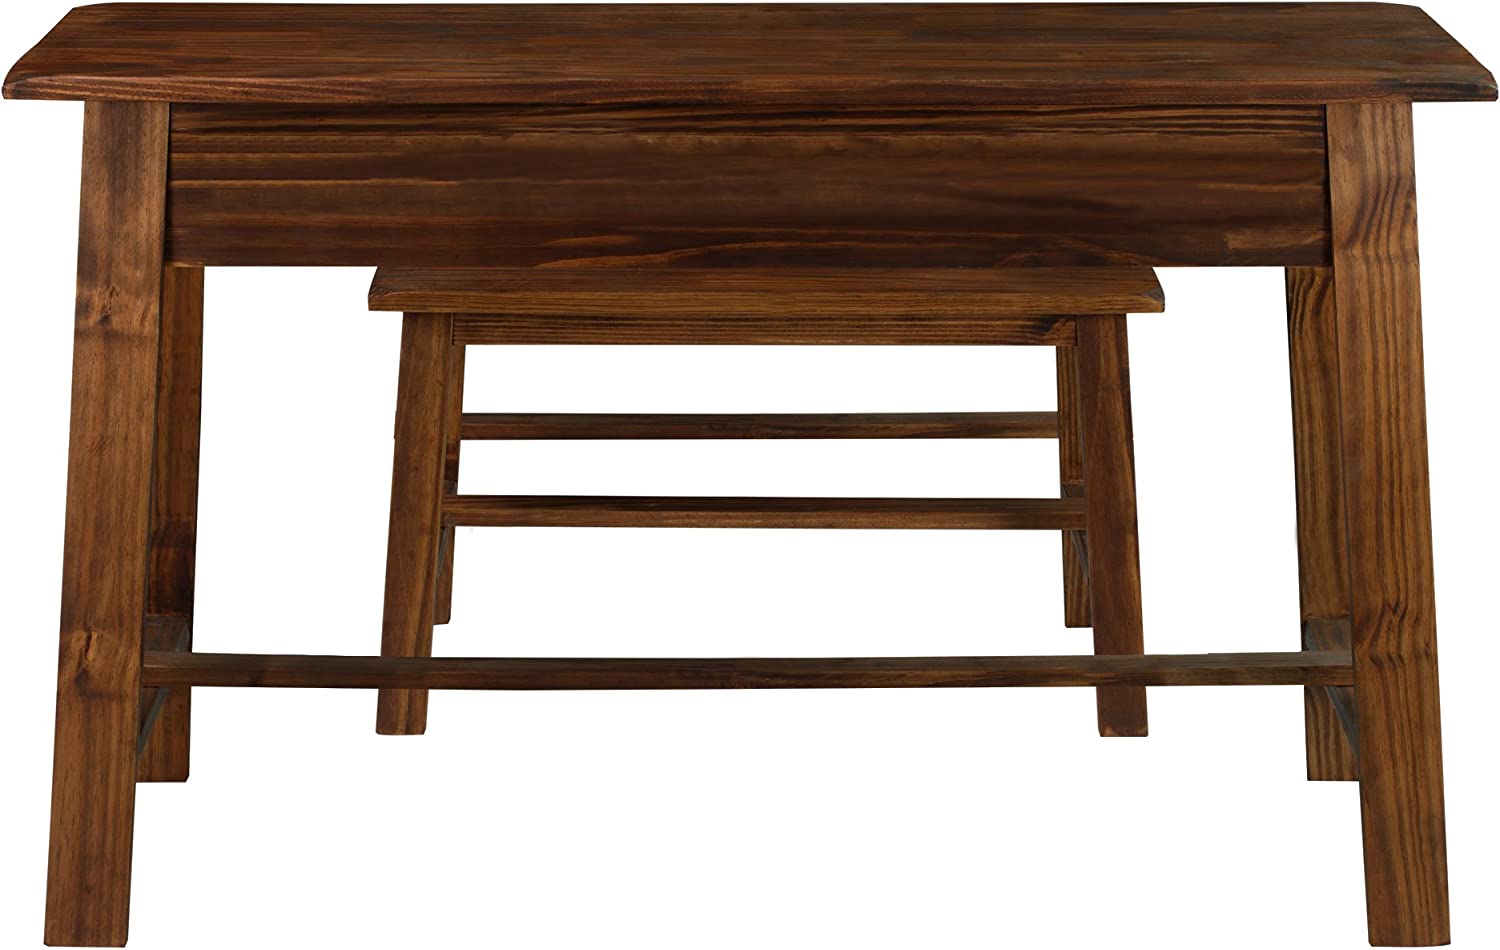 Casual Home Nostalgia Rustic Mocha Desk with Bench